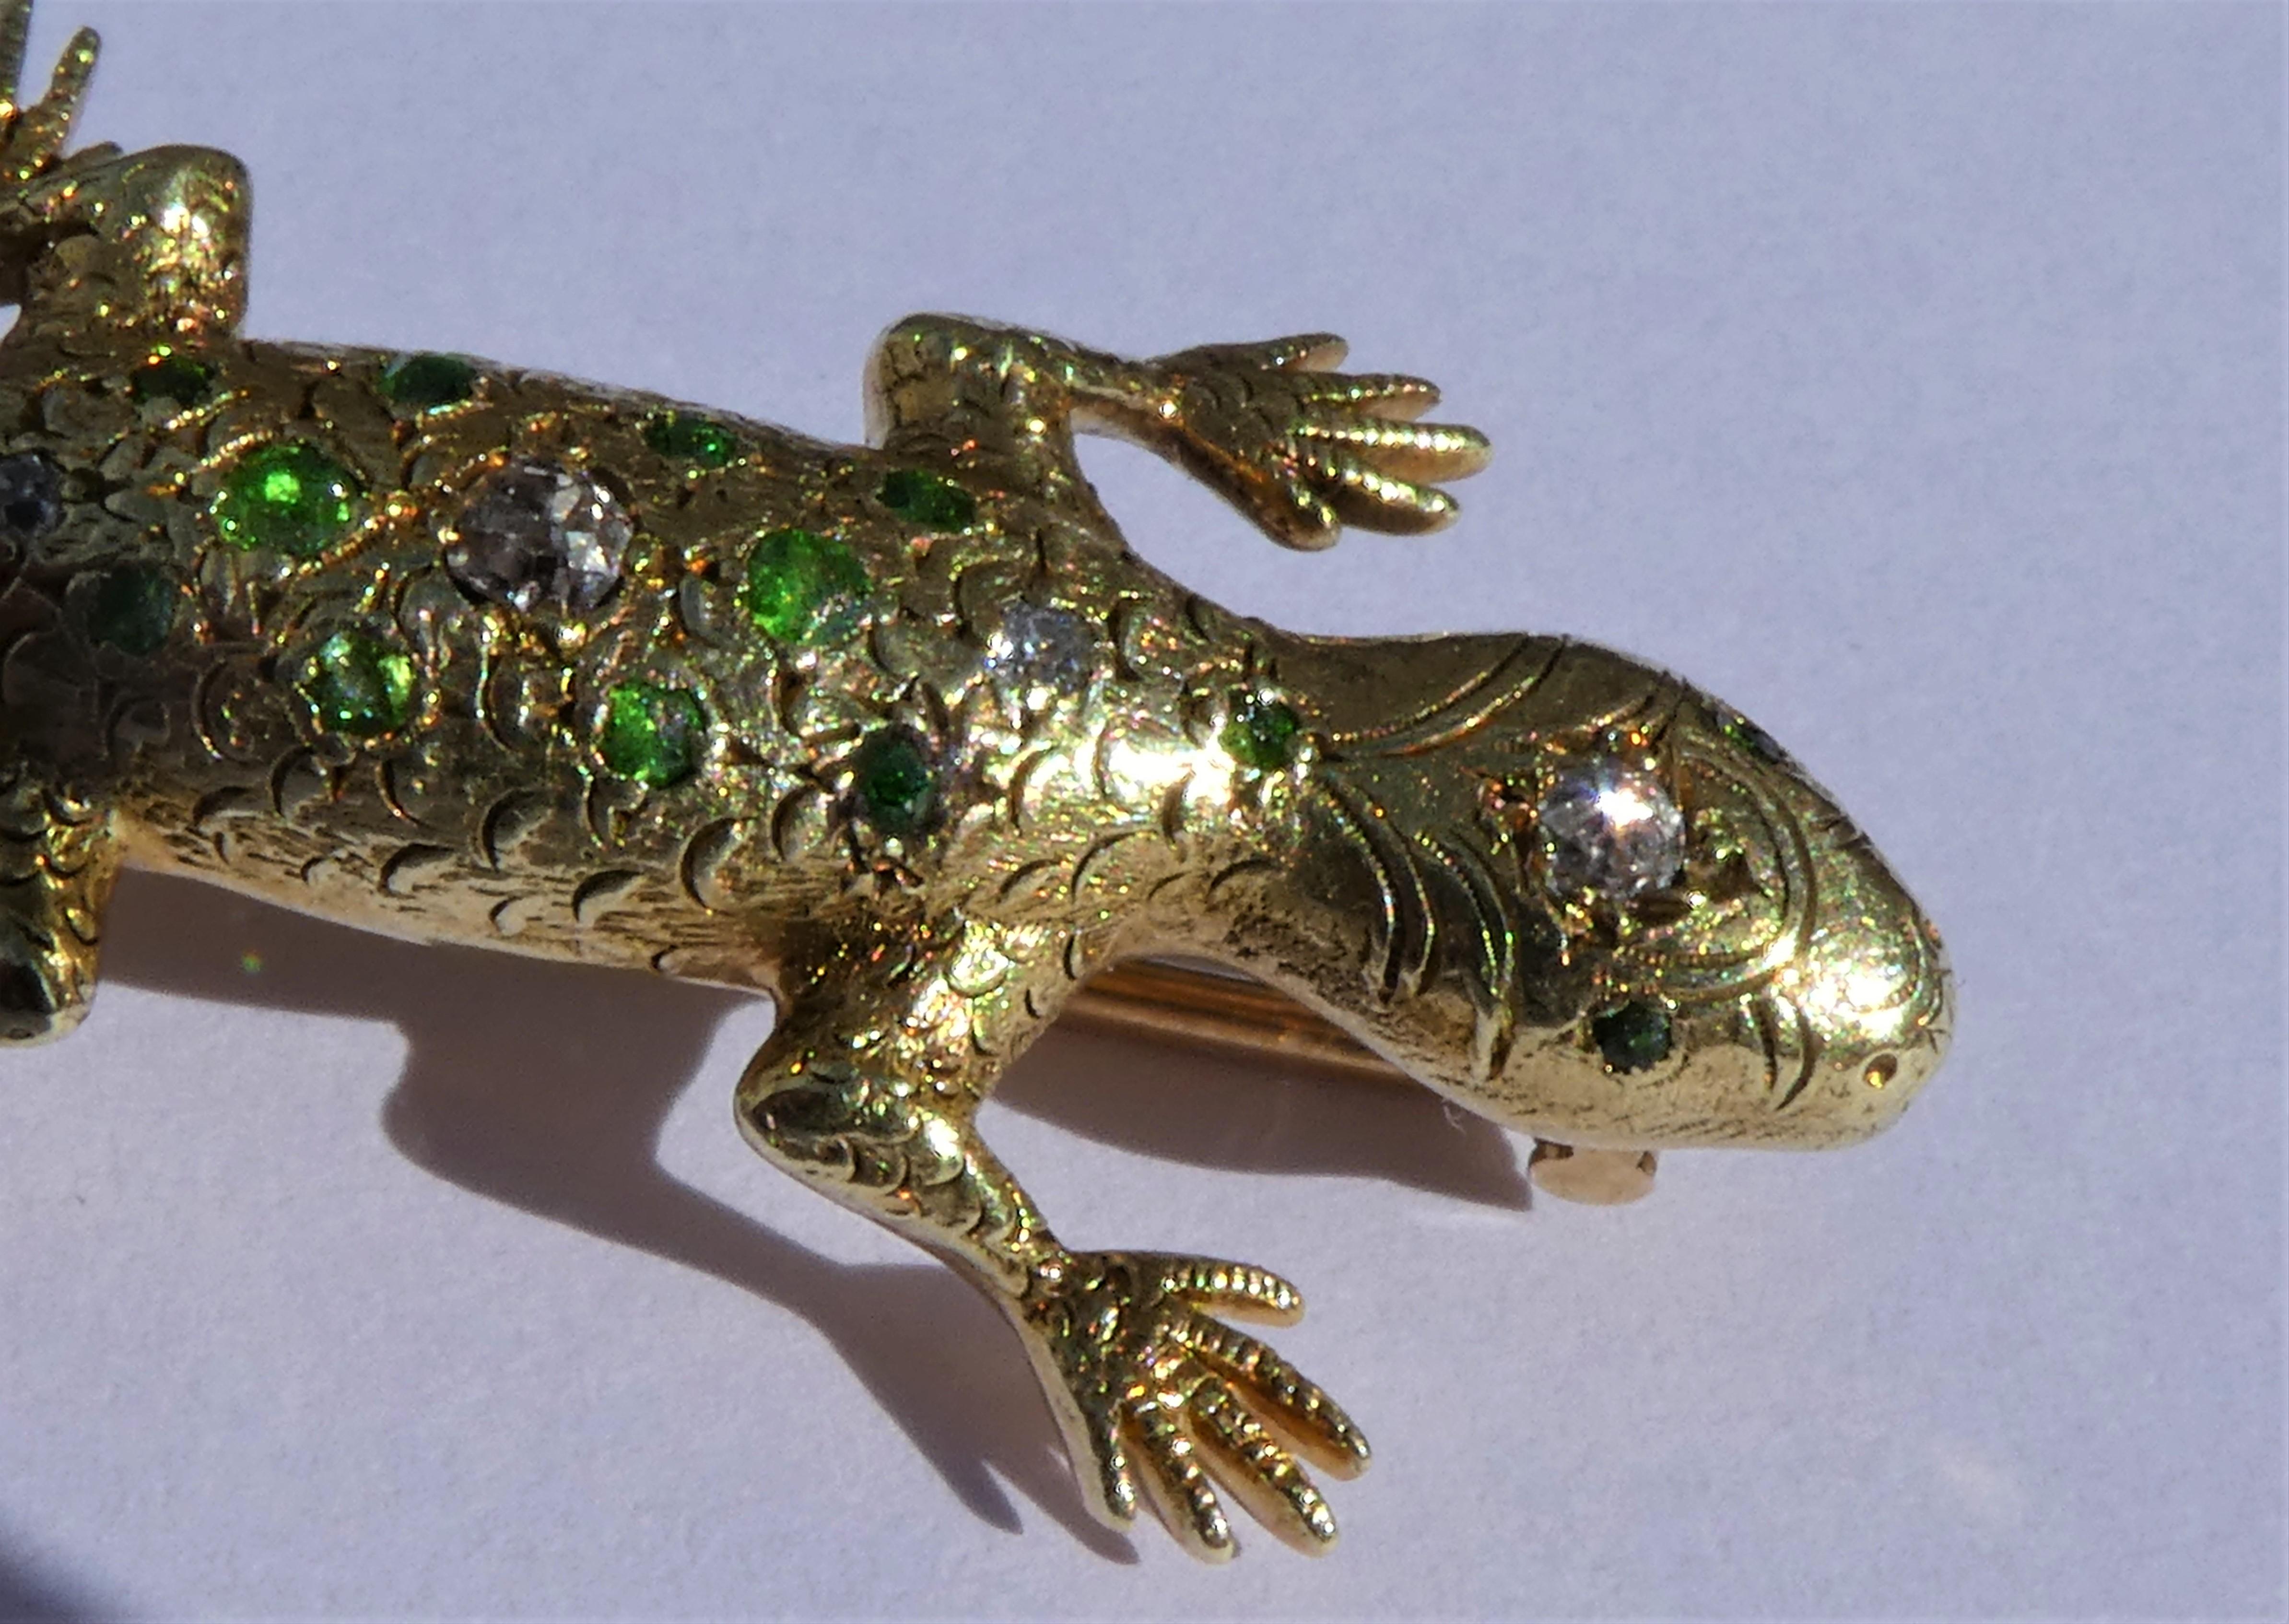 This lizard brooch was crafted circa 1890 by the American company A. J. Hedges & Co. of N. J. in 14 karat yellow gold. The lizard with its detailed engraving of the head, body, feet and tail looks naturalistic and is of timeless beauty even though